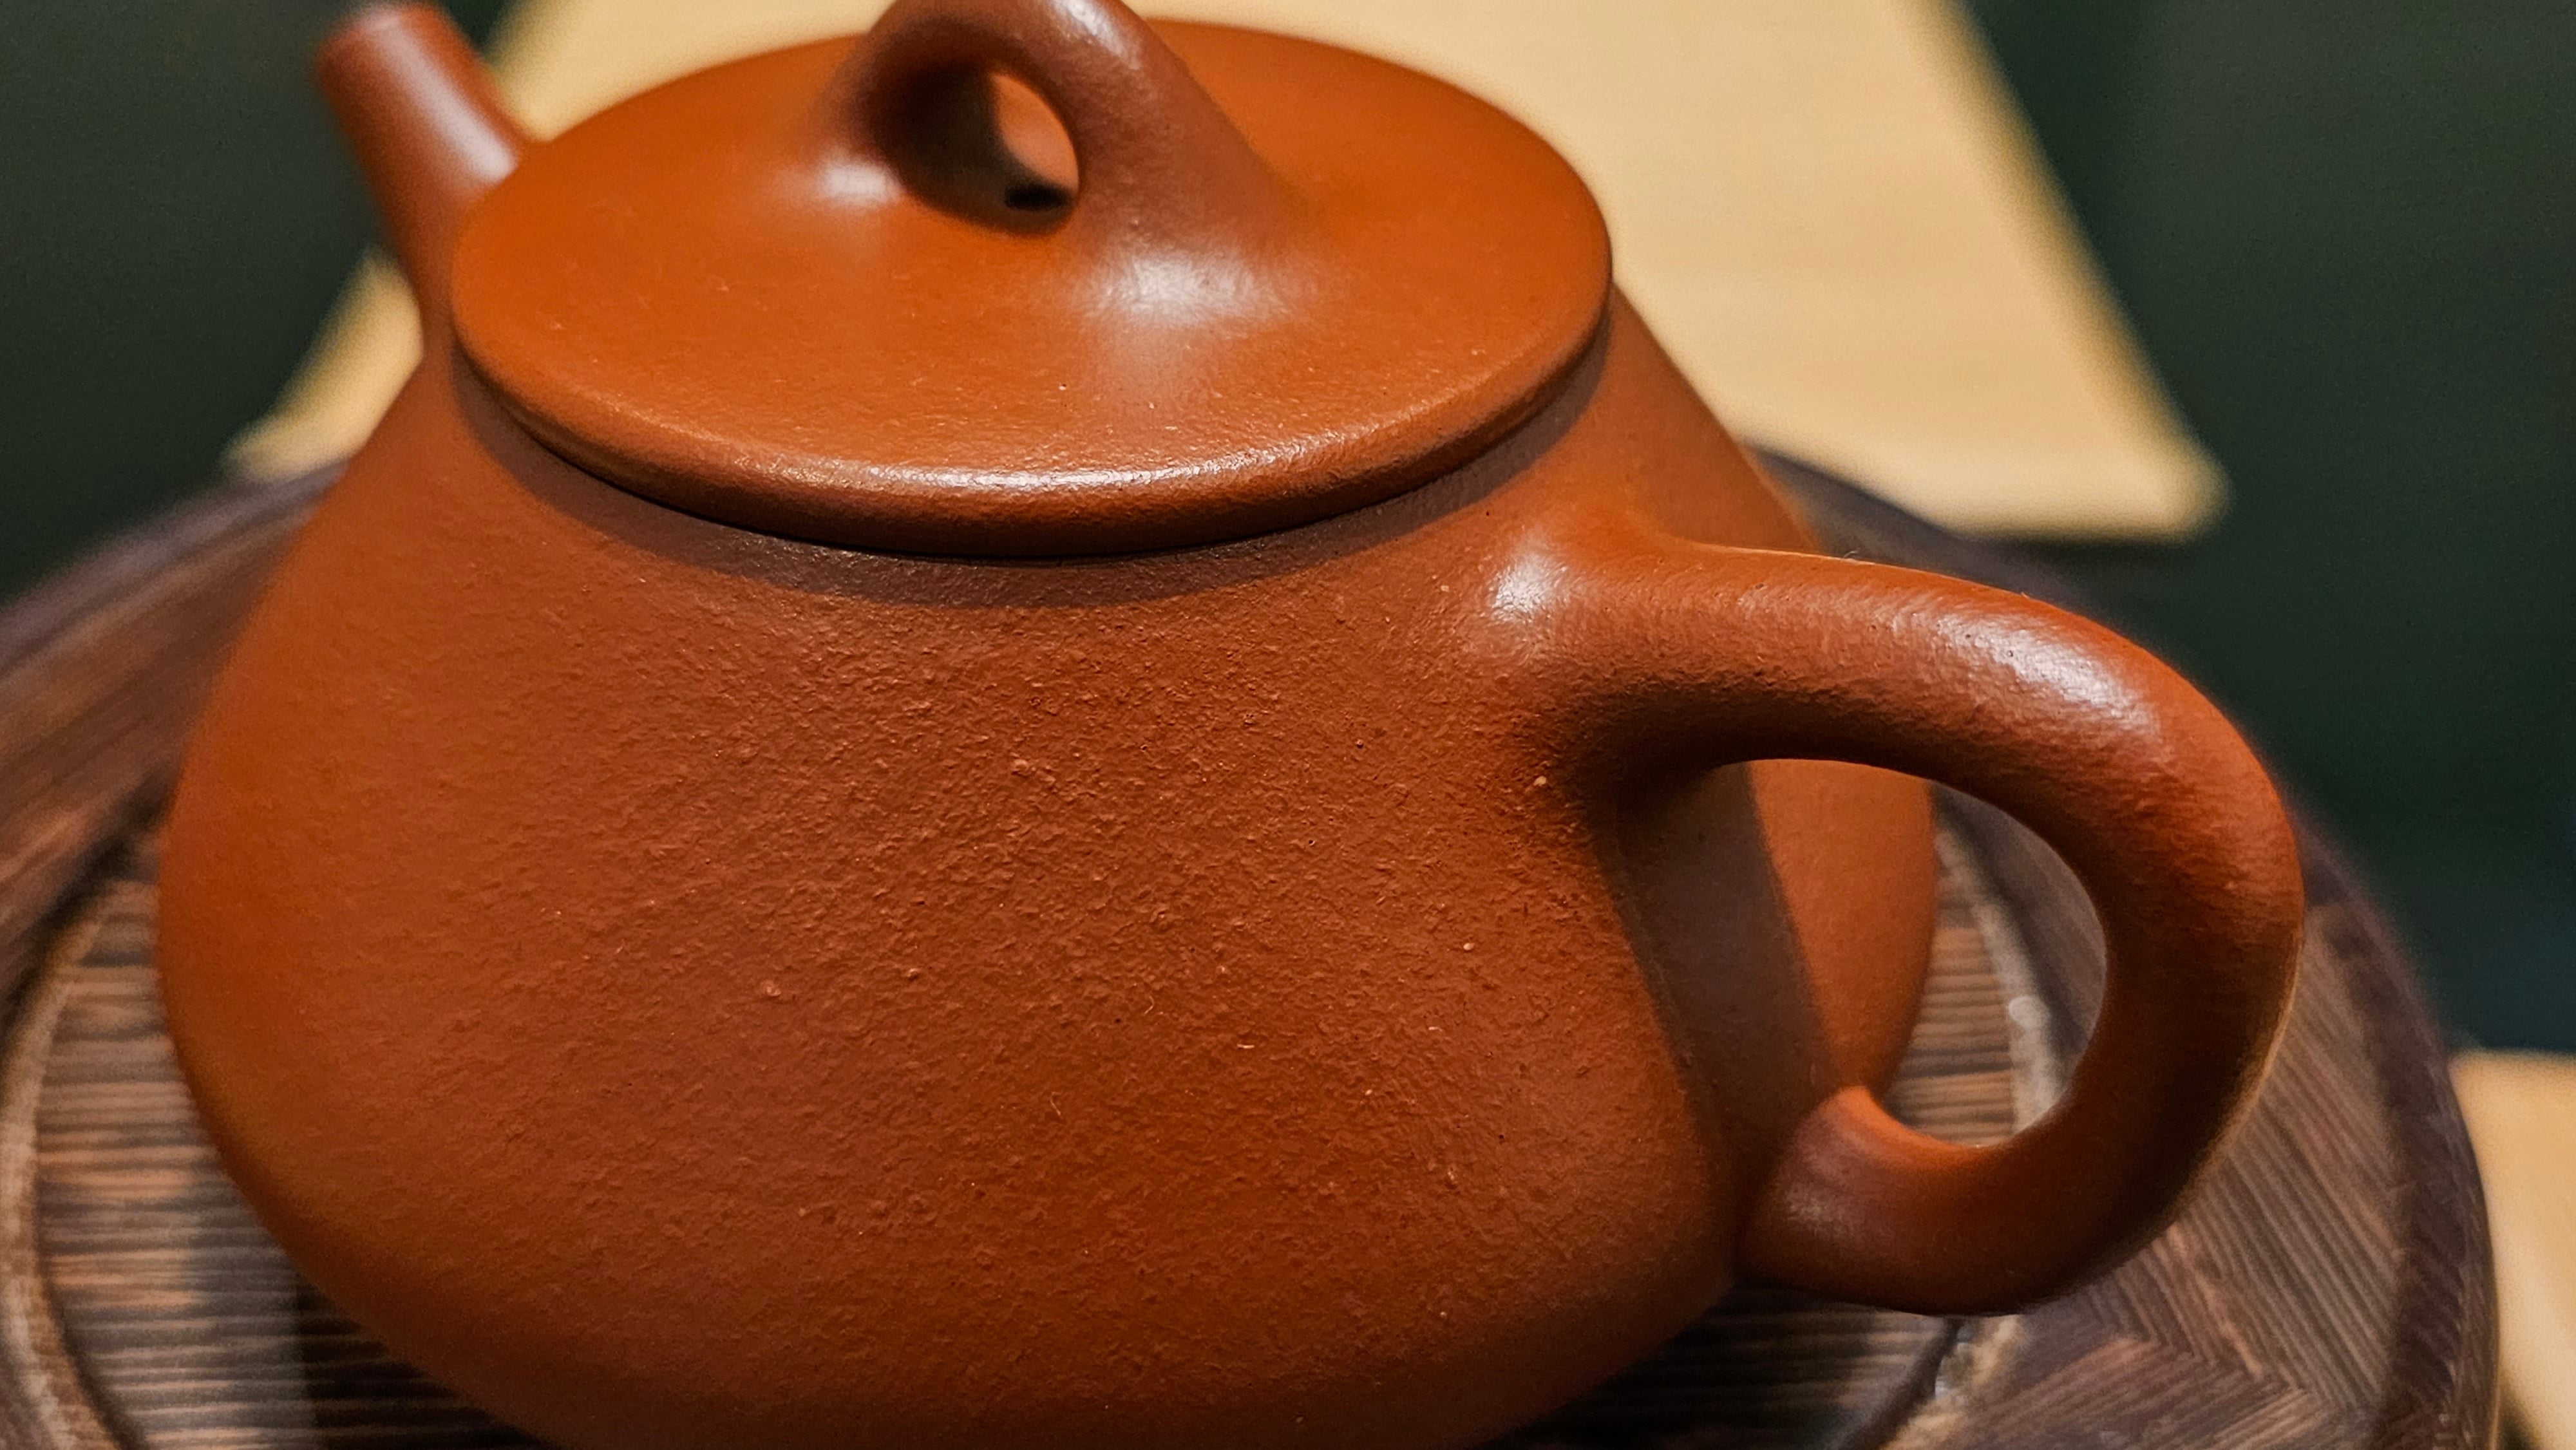 Ping Gai Shi Piao 平盖石瓢, Yuan Kuang Da Hong Pao 原矿大红袍, made by L2 Senior Master Cao Lan Fang 国家高级工艺美术师～曹兰芳。- commissioned in Jan 2022 for our esteemed Patron Dr Lin (Singapore), Shown here for viewing.